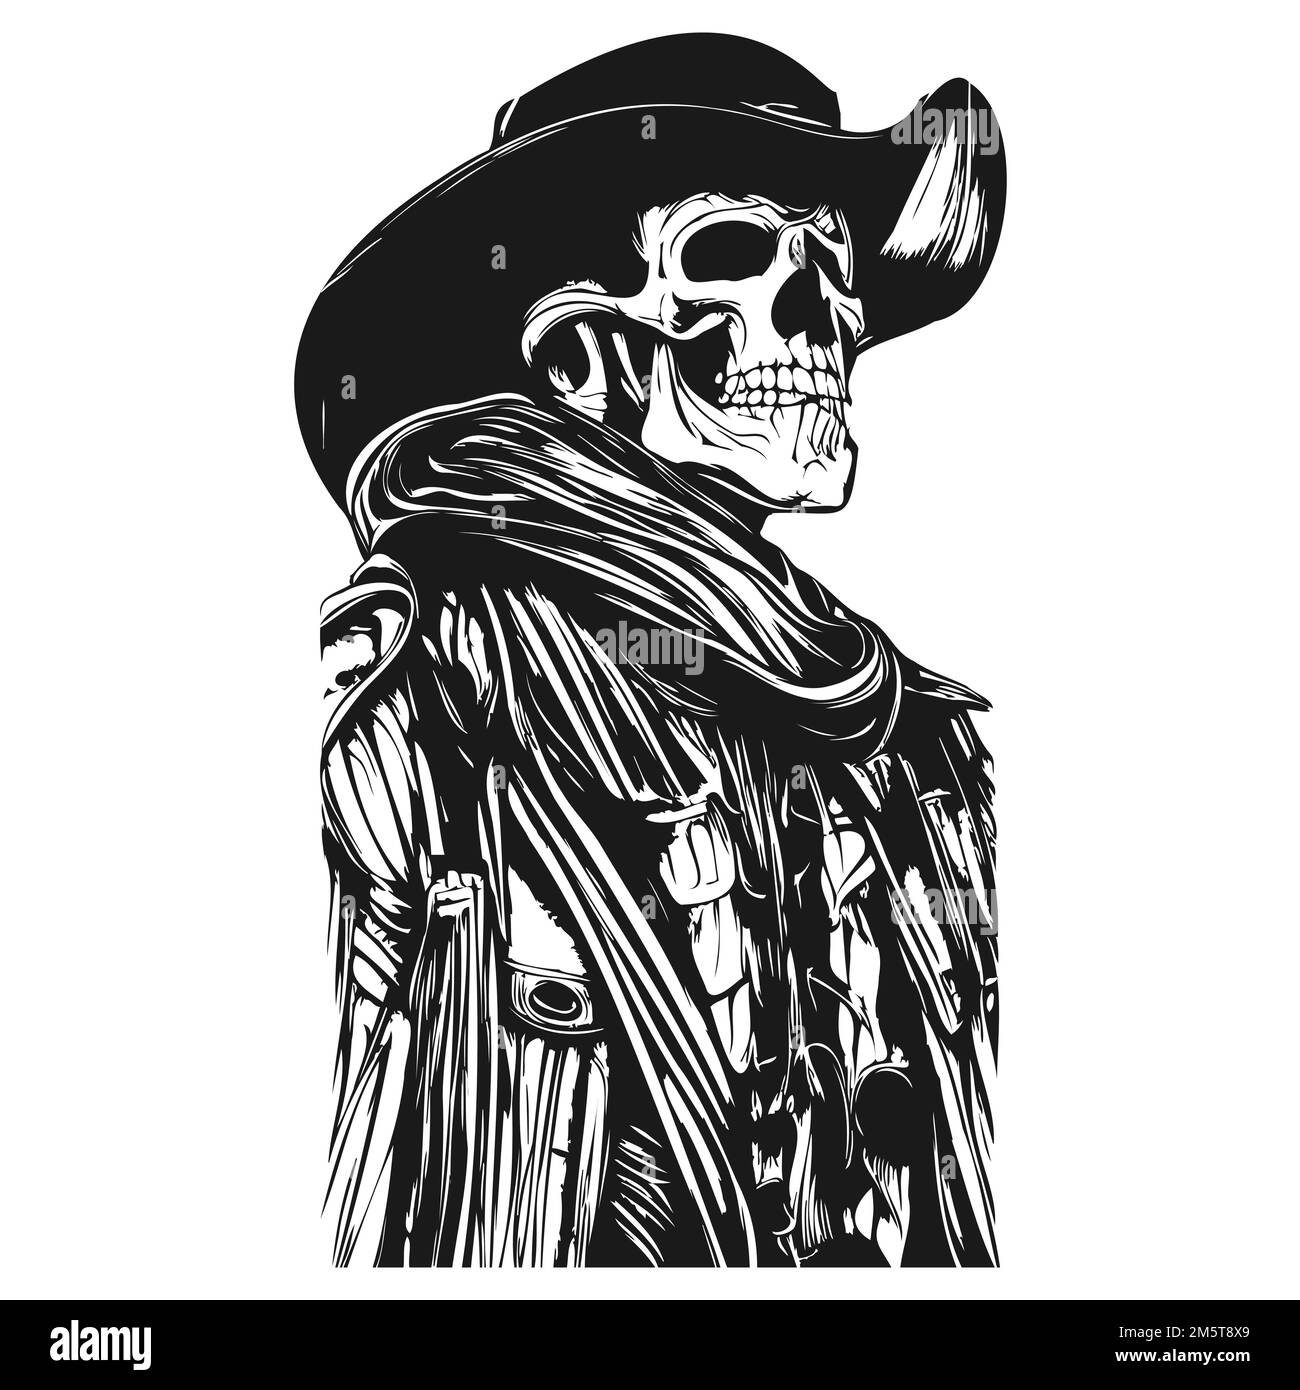 Cowboy skeleton holding a  Forevermore Tattoo Parlour  Facebook